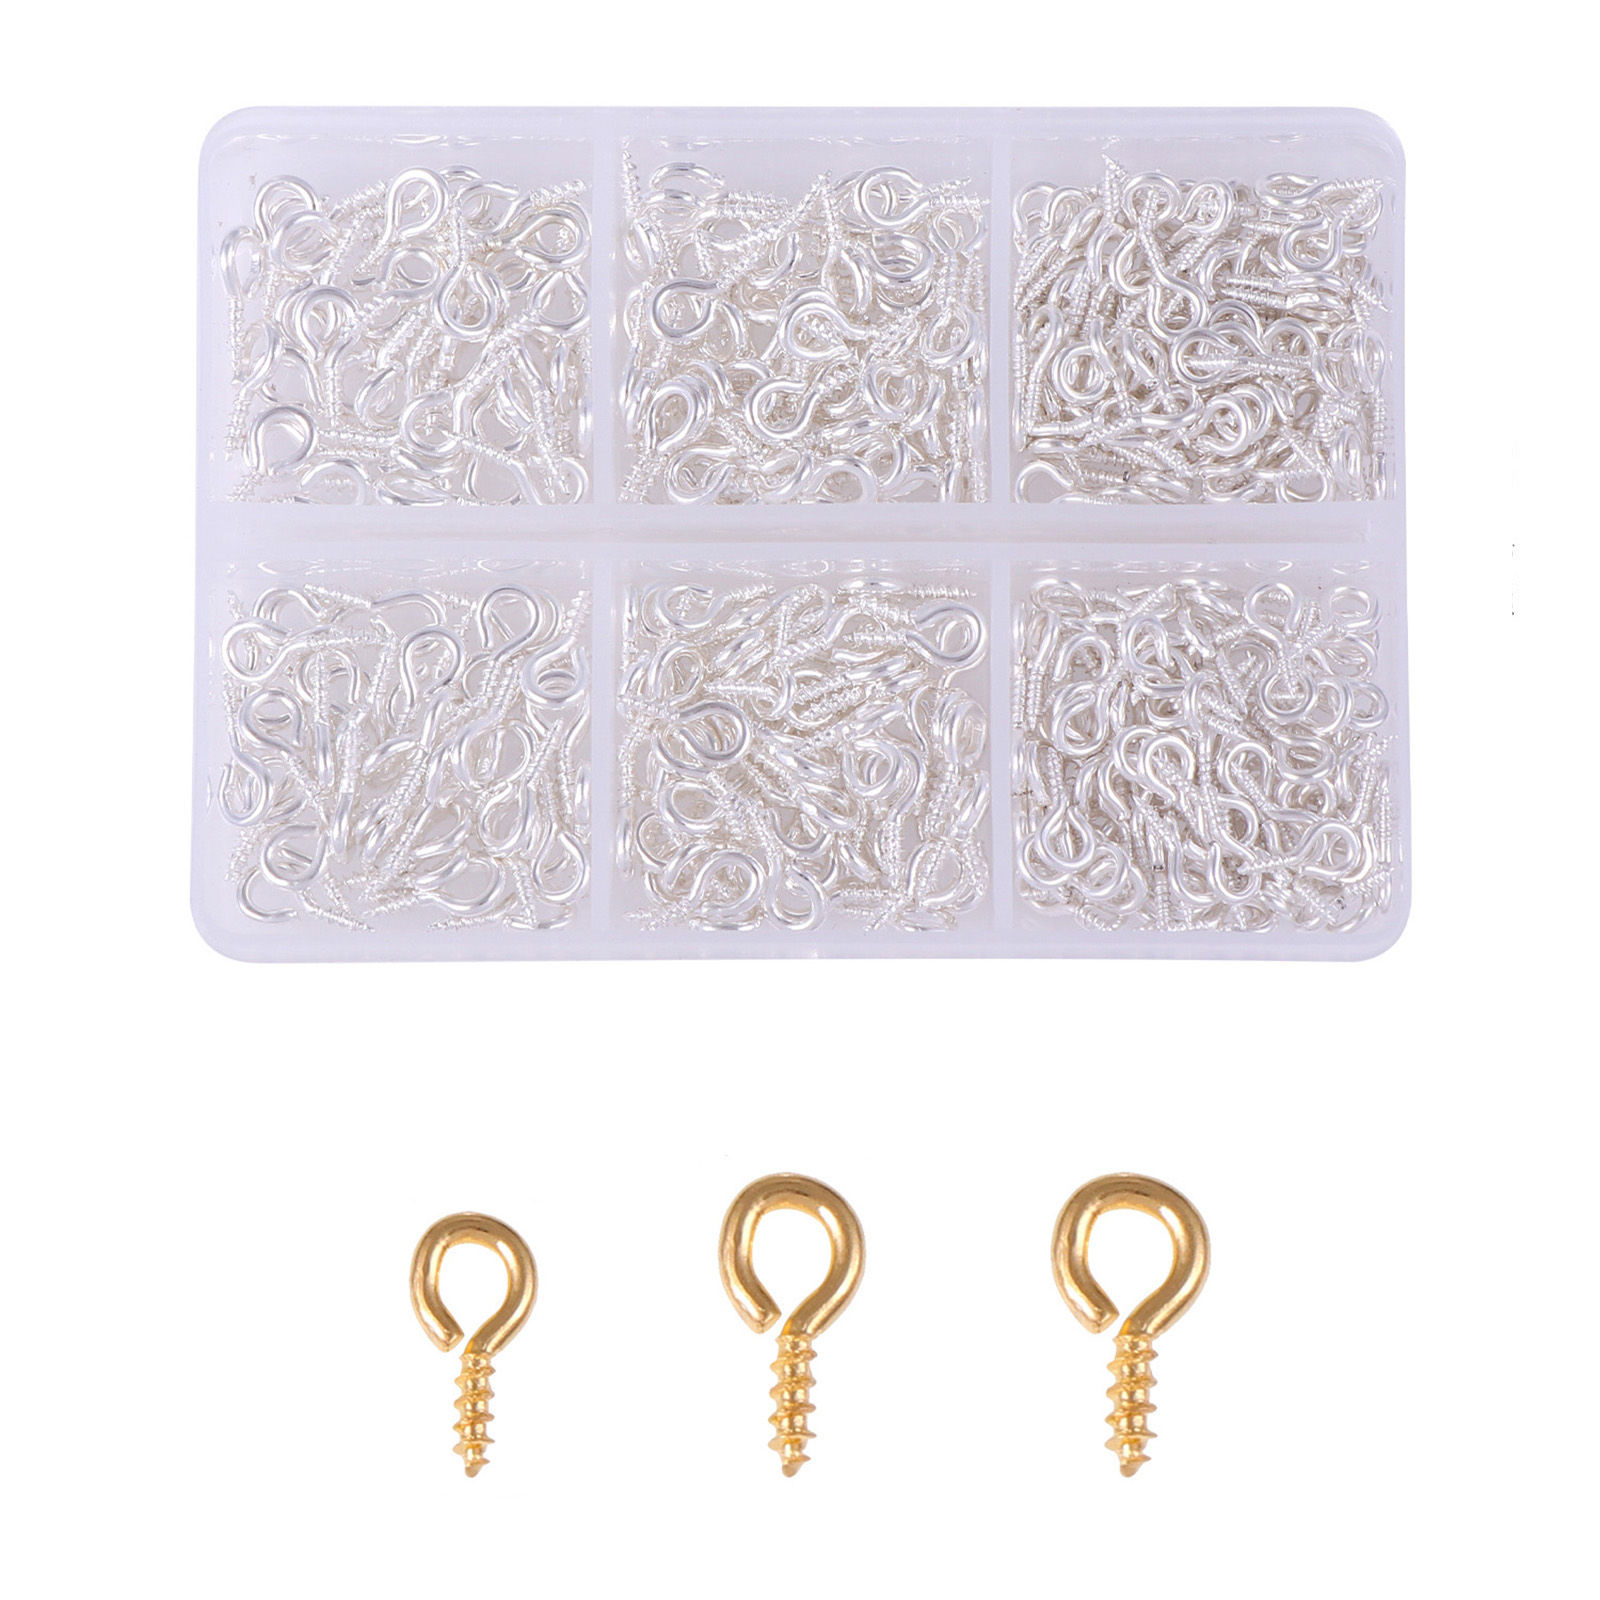 Picture of Iron Based Alloy Screw Eyes Bails Top Drilled Findings Silver Plated 8cm x 5.5cm, 1 Set ( 400 PCs/Box)